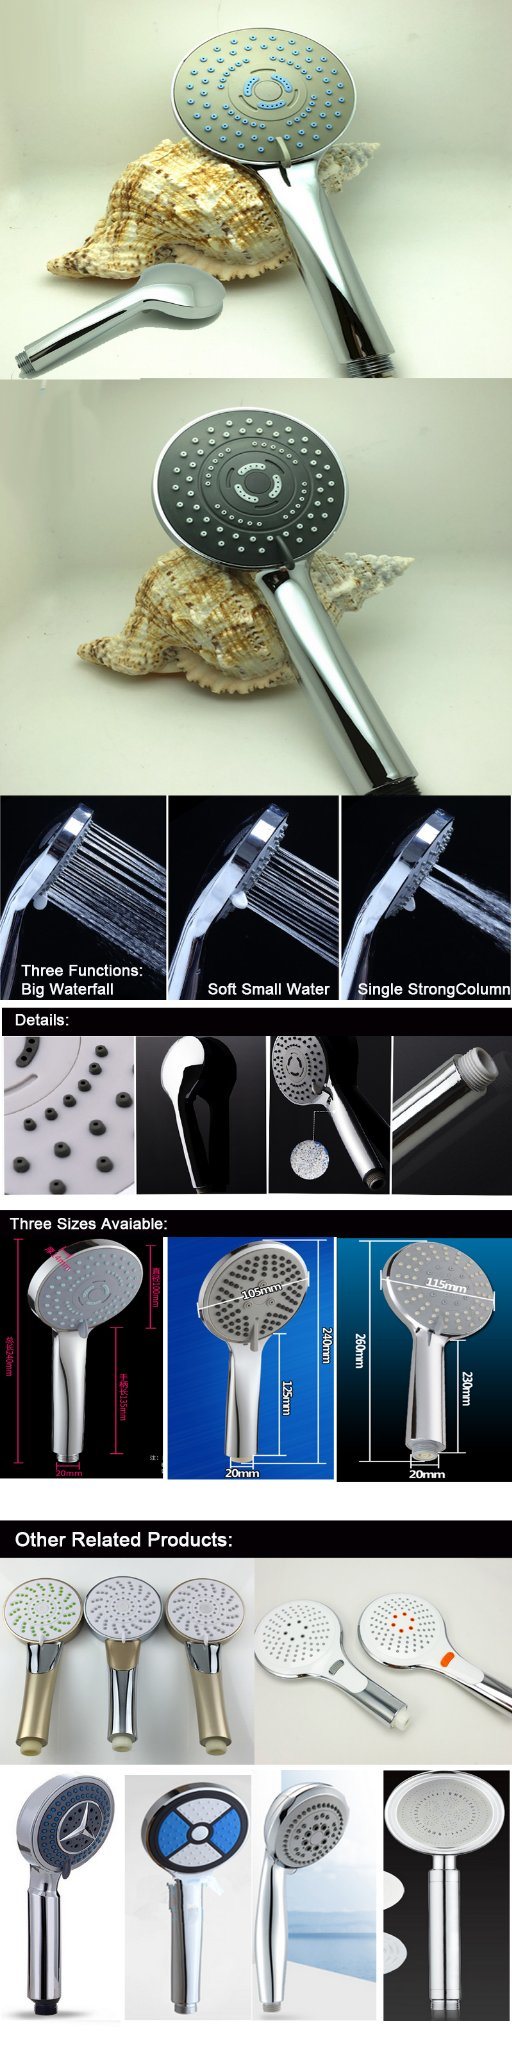 Latest Arrival Supercharged Shower Plastic Shower Head